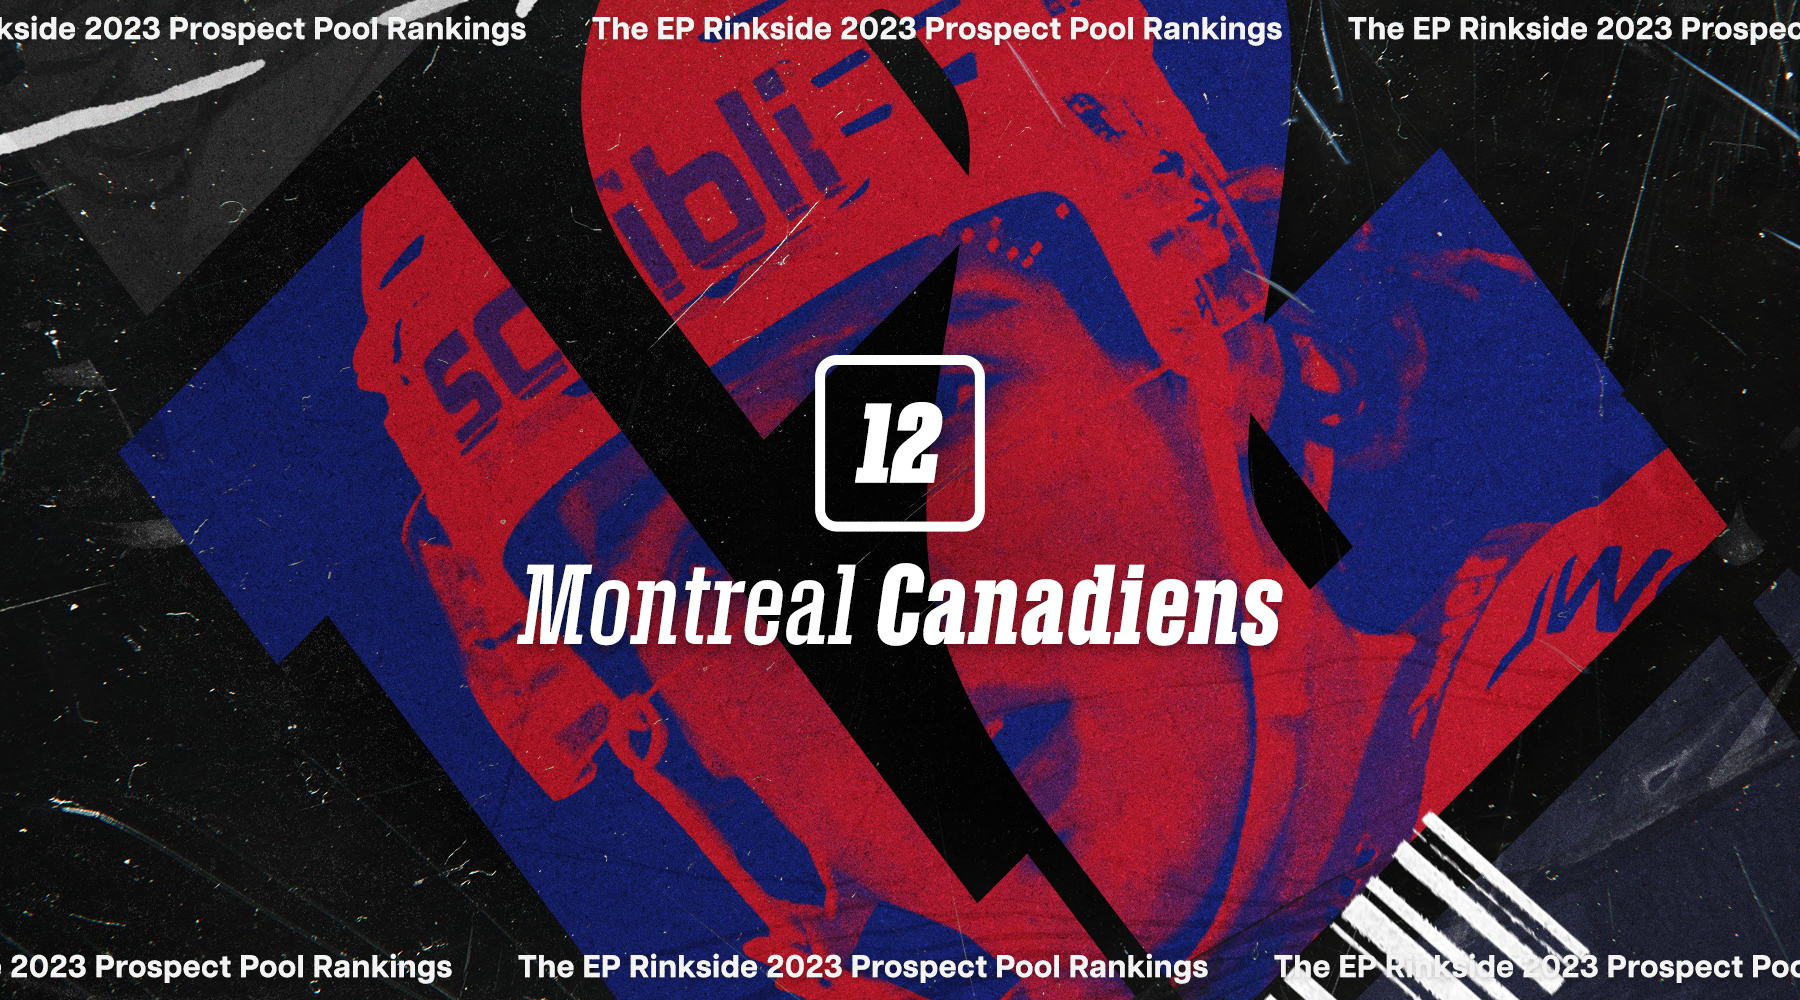 EP Rinkside 2023 NHL Prospect Pool Rankings: No. 12-ranked Montréal Canadiens